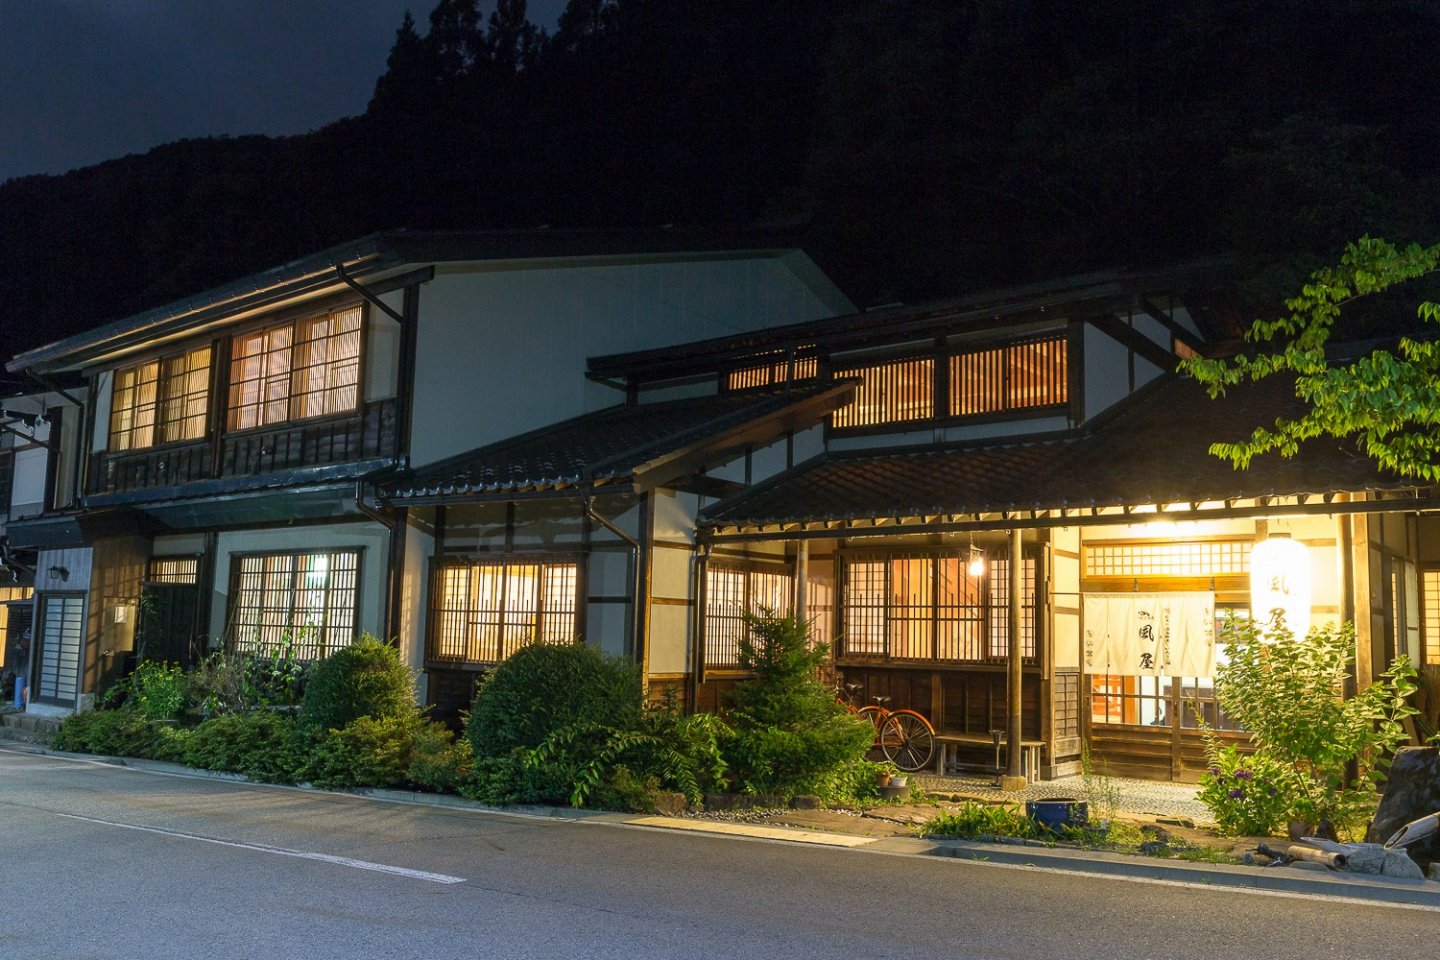 The Kazeya Ryokan is peaceful and quiet at night